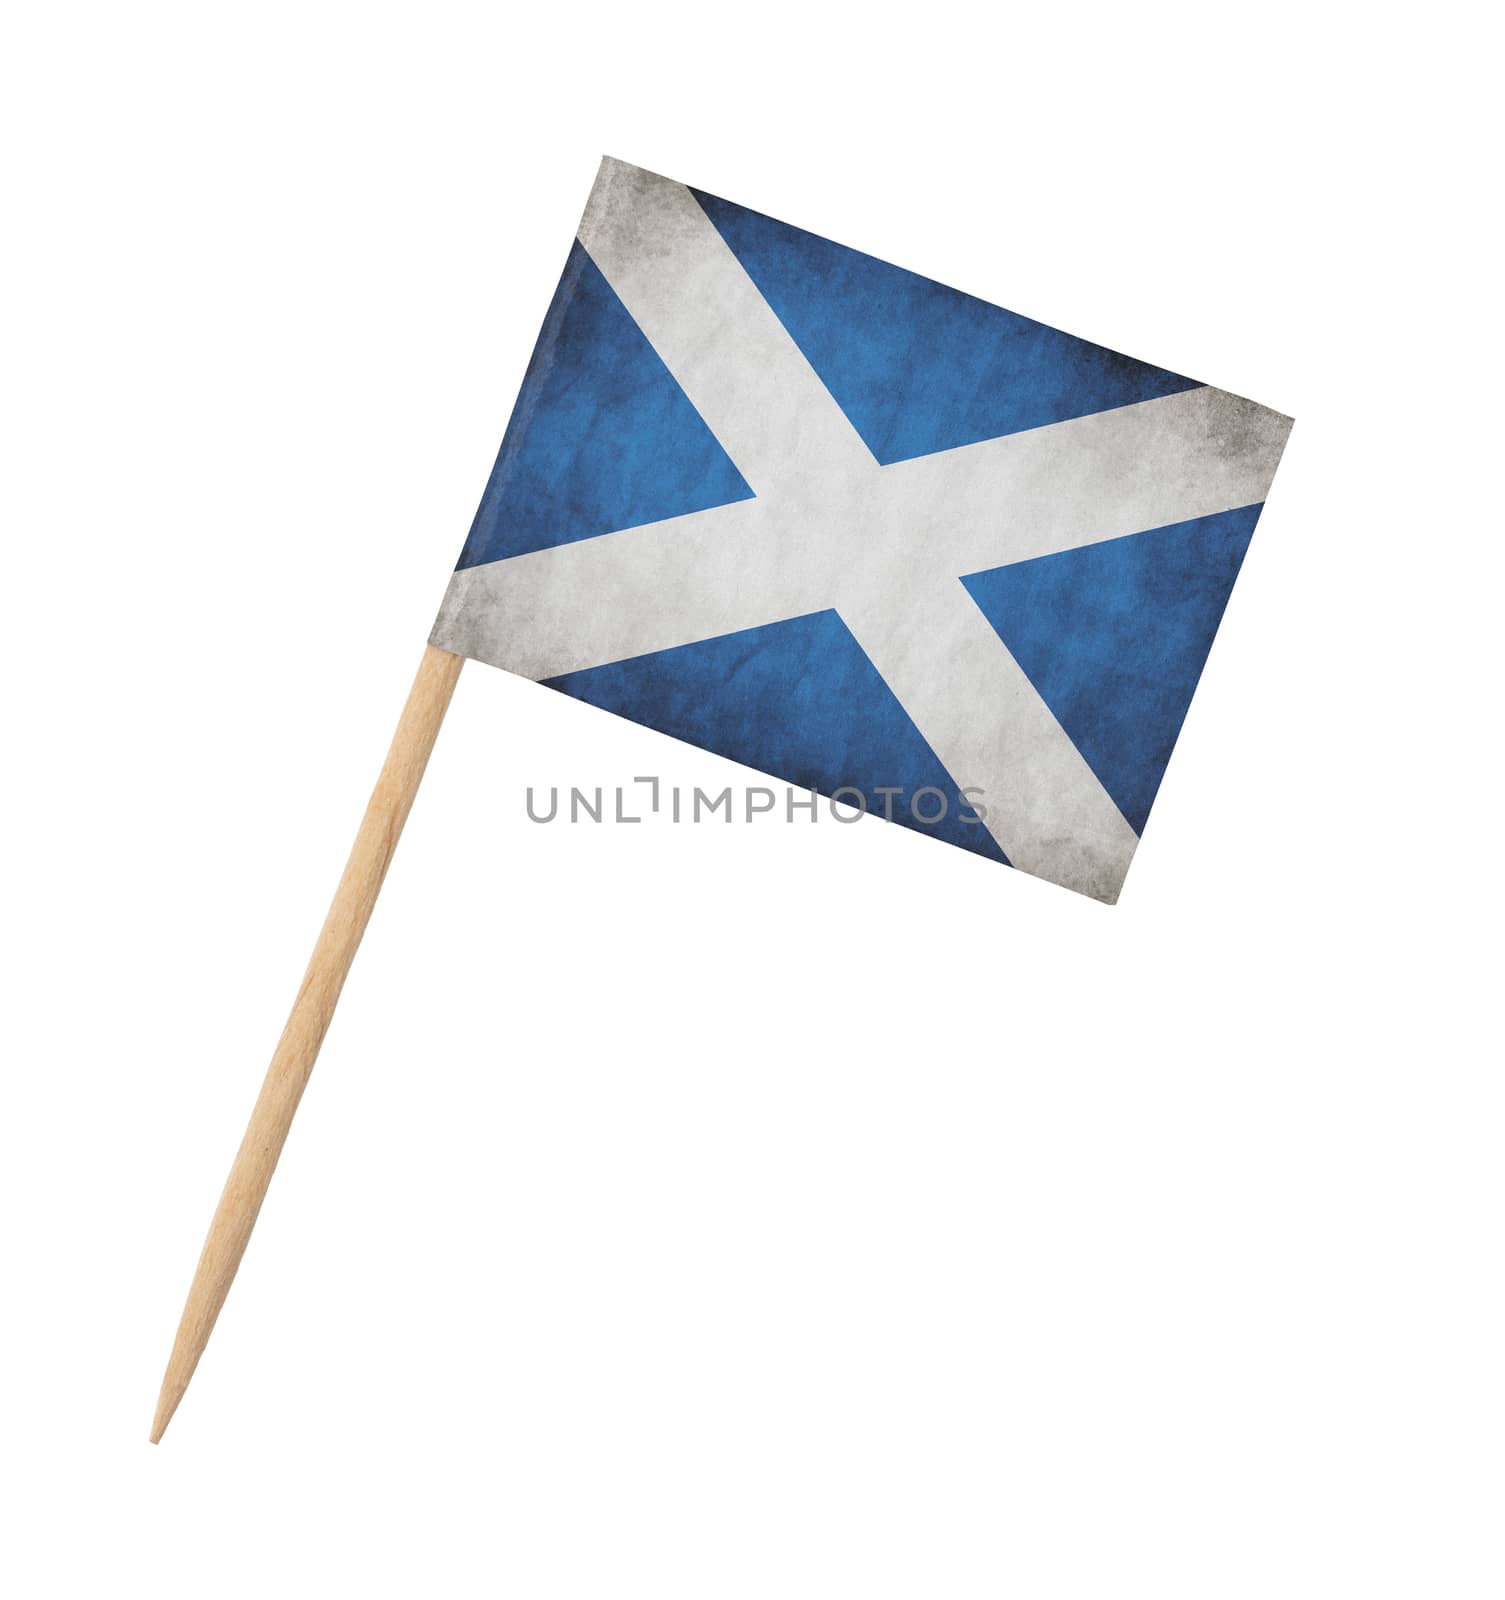 Small paper flag of Scotland on wooden stick, isolated on white